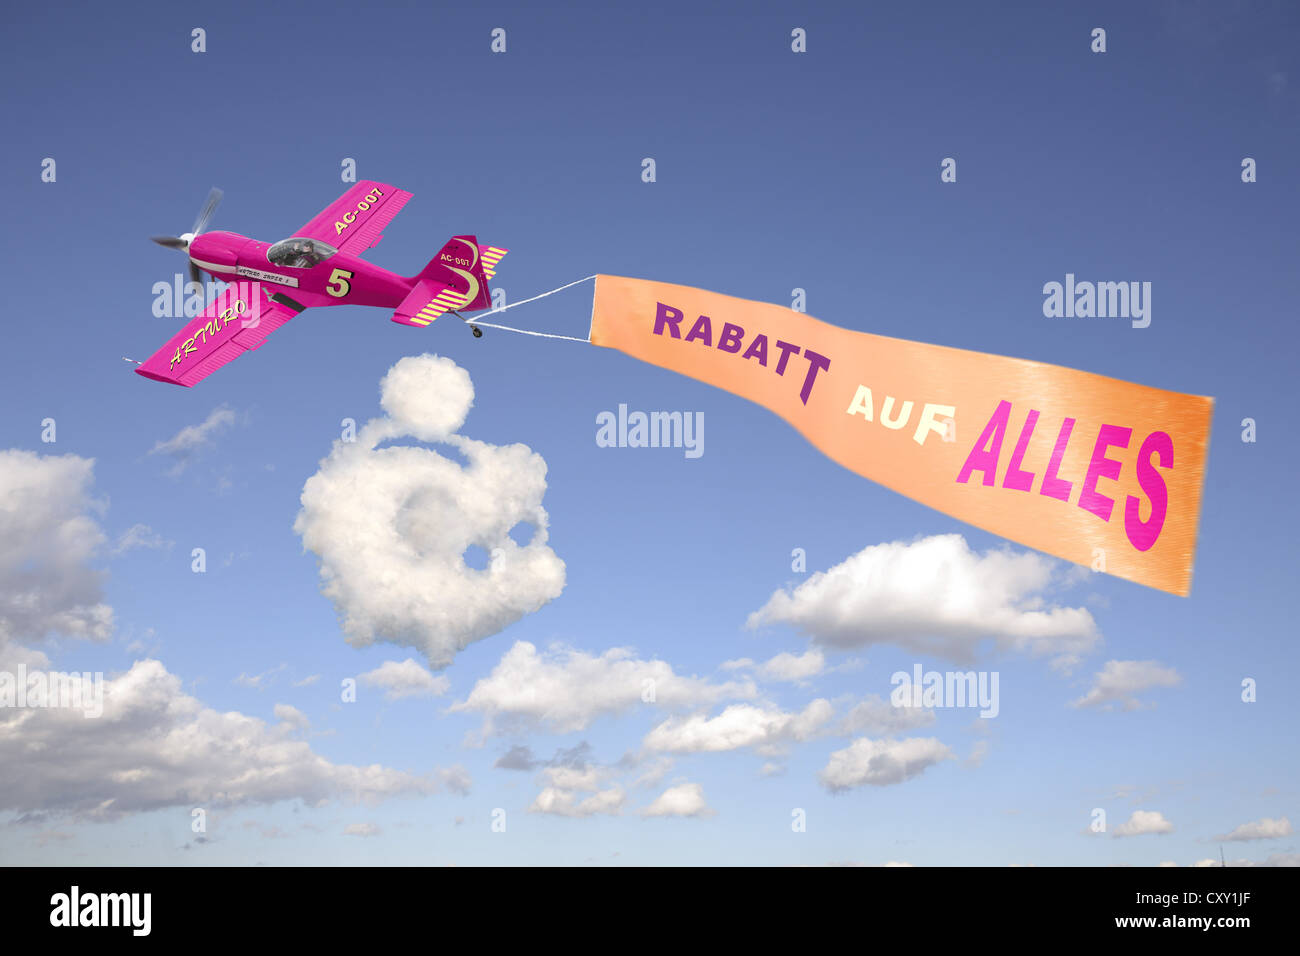 Plane in the sky pulling a banner with the message Rabatt auf alles, German for Discount on everything, illustration Stock Photo